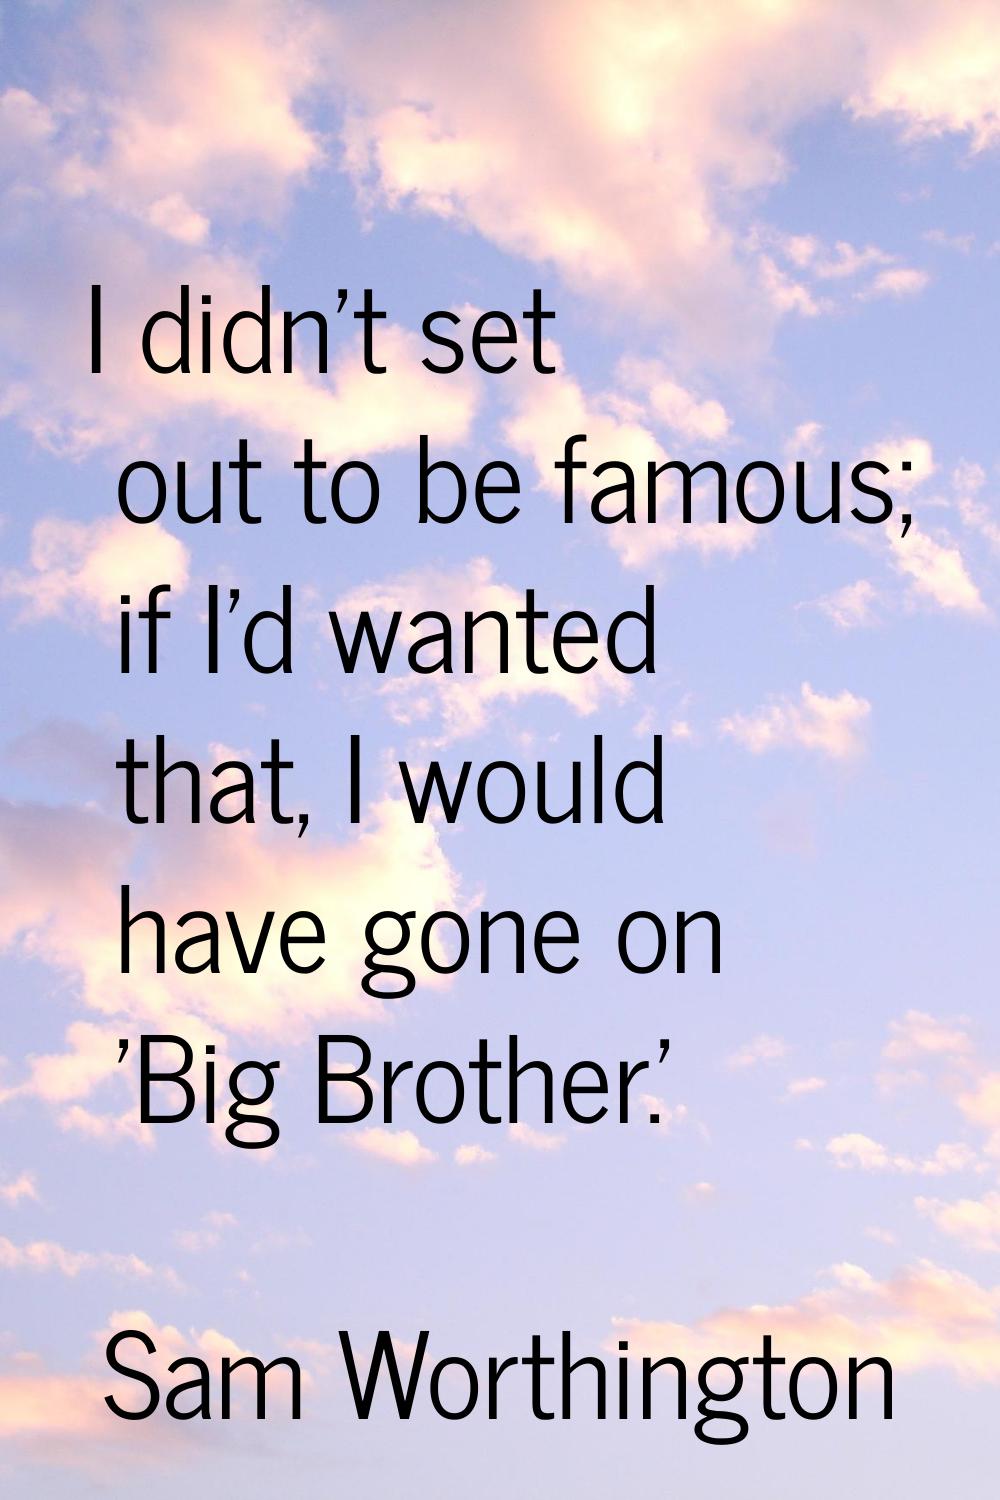 I didn't set out to be famous; if I'd wanted that, I would have gone on 'Big Brother.'